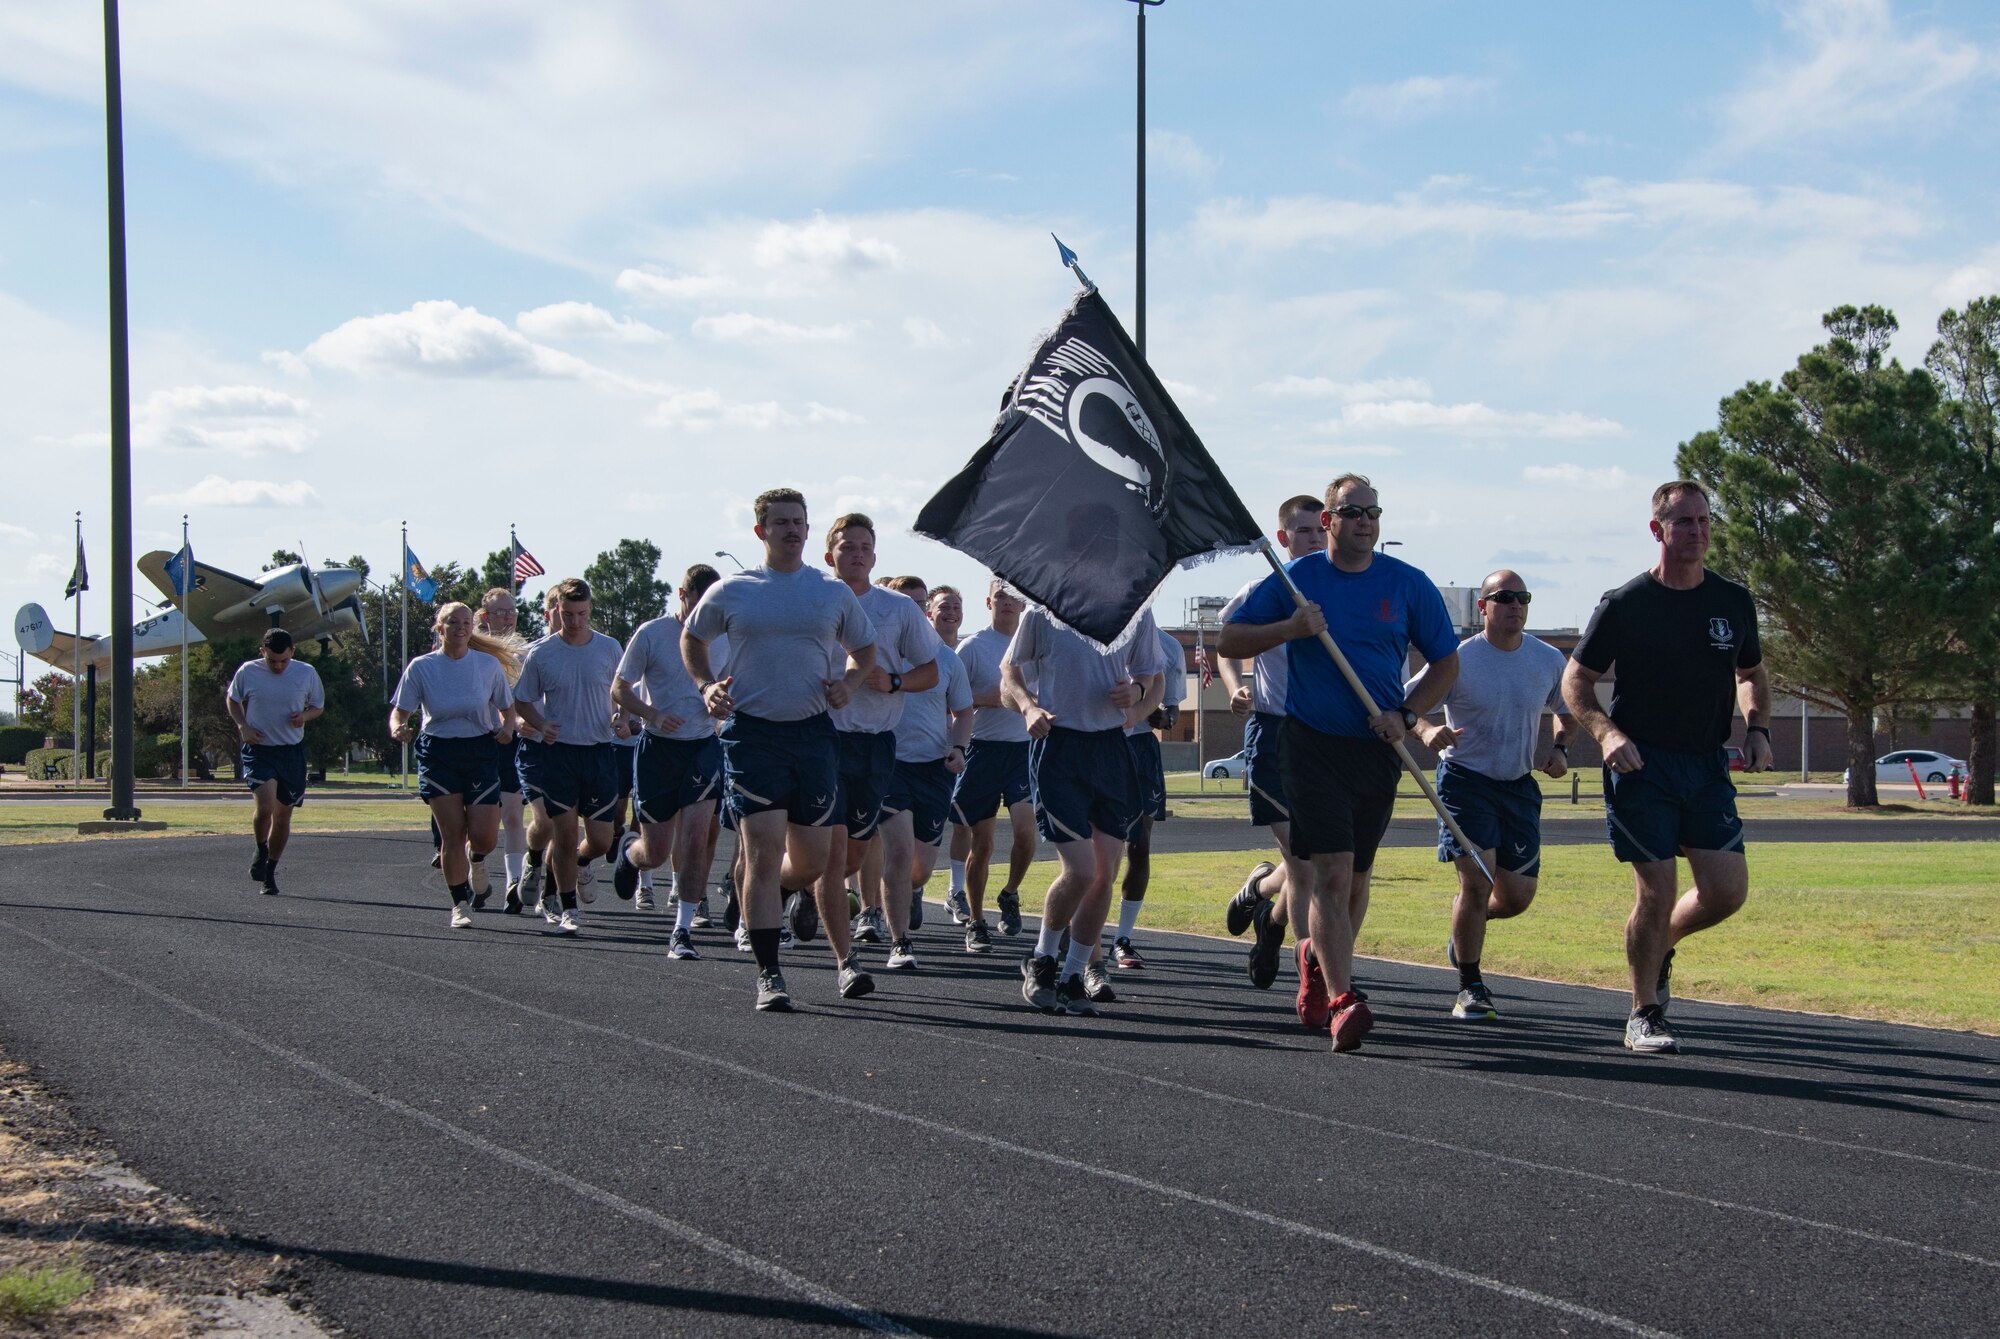 U.S. Air Force Tech. Sgt. Matthew Songe, Military Training Leader assigned to the 97th Training Squadron, holds the POW/MIA flag, joined by Col. William Mickley, 97th Air Mobility Wing vice commander and students of the 97th TRS, during the 24-hour POW/MIA remembrance run